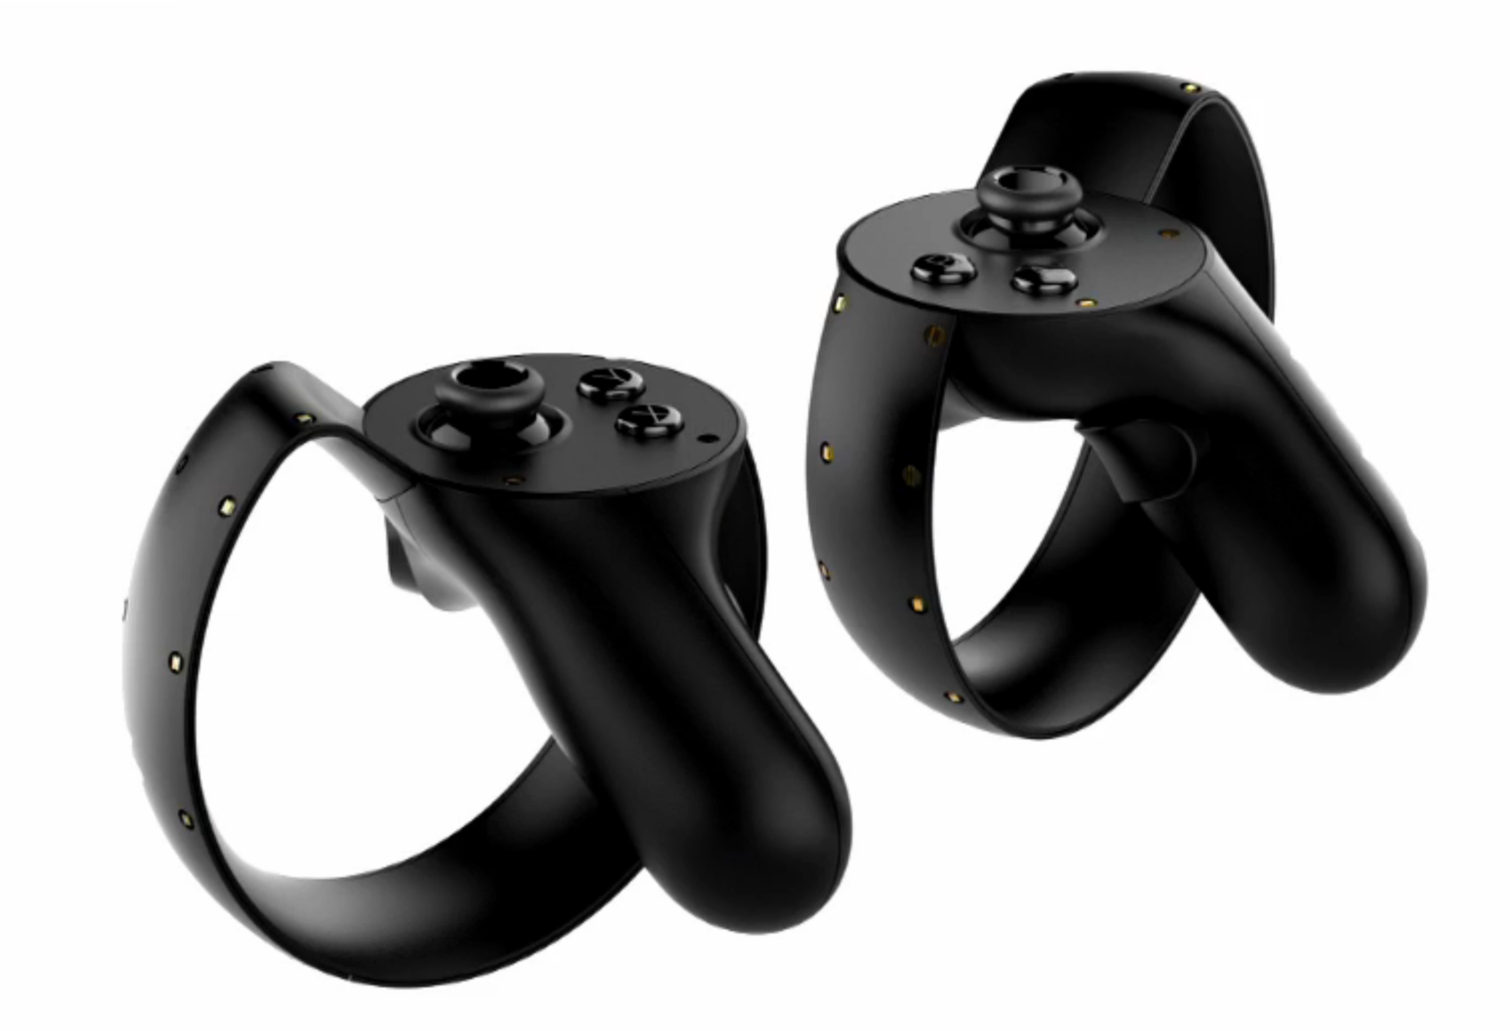 Oculus Touch controllers will cost 